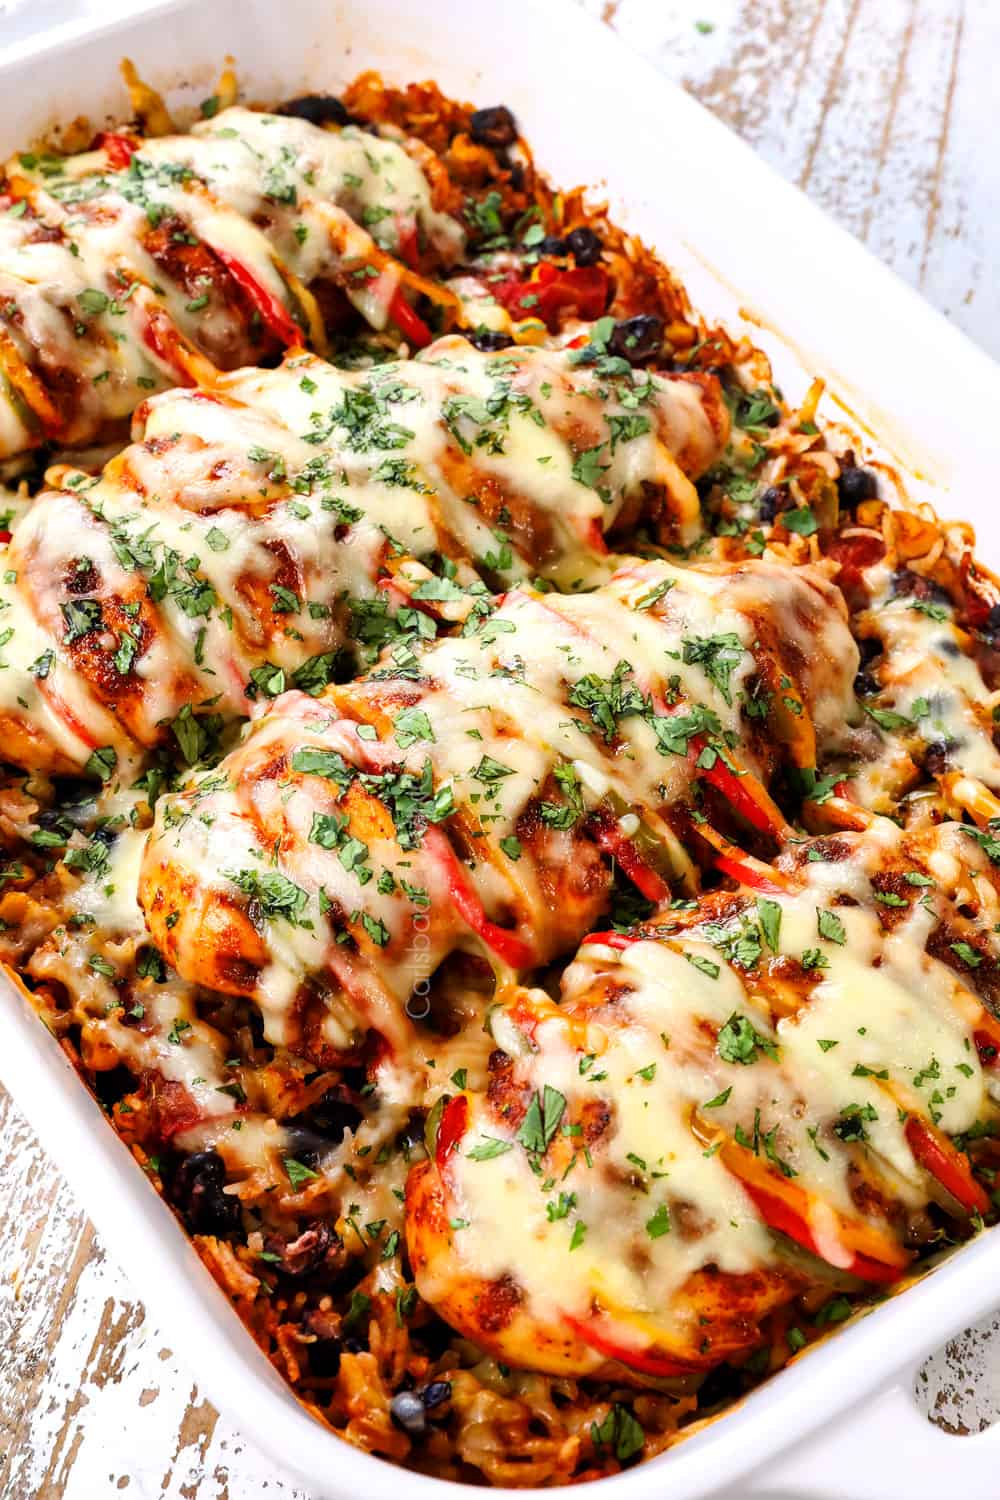 Hasselback chicken with fajita bell peppers baked in a casserole dish